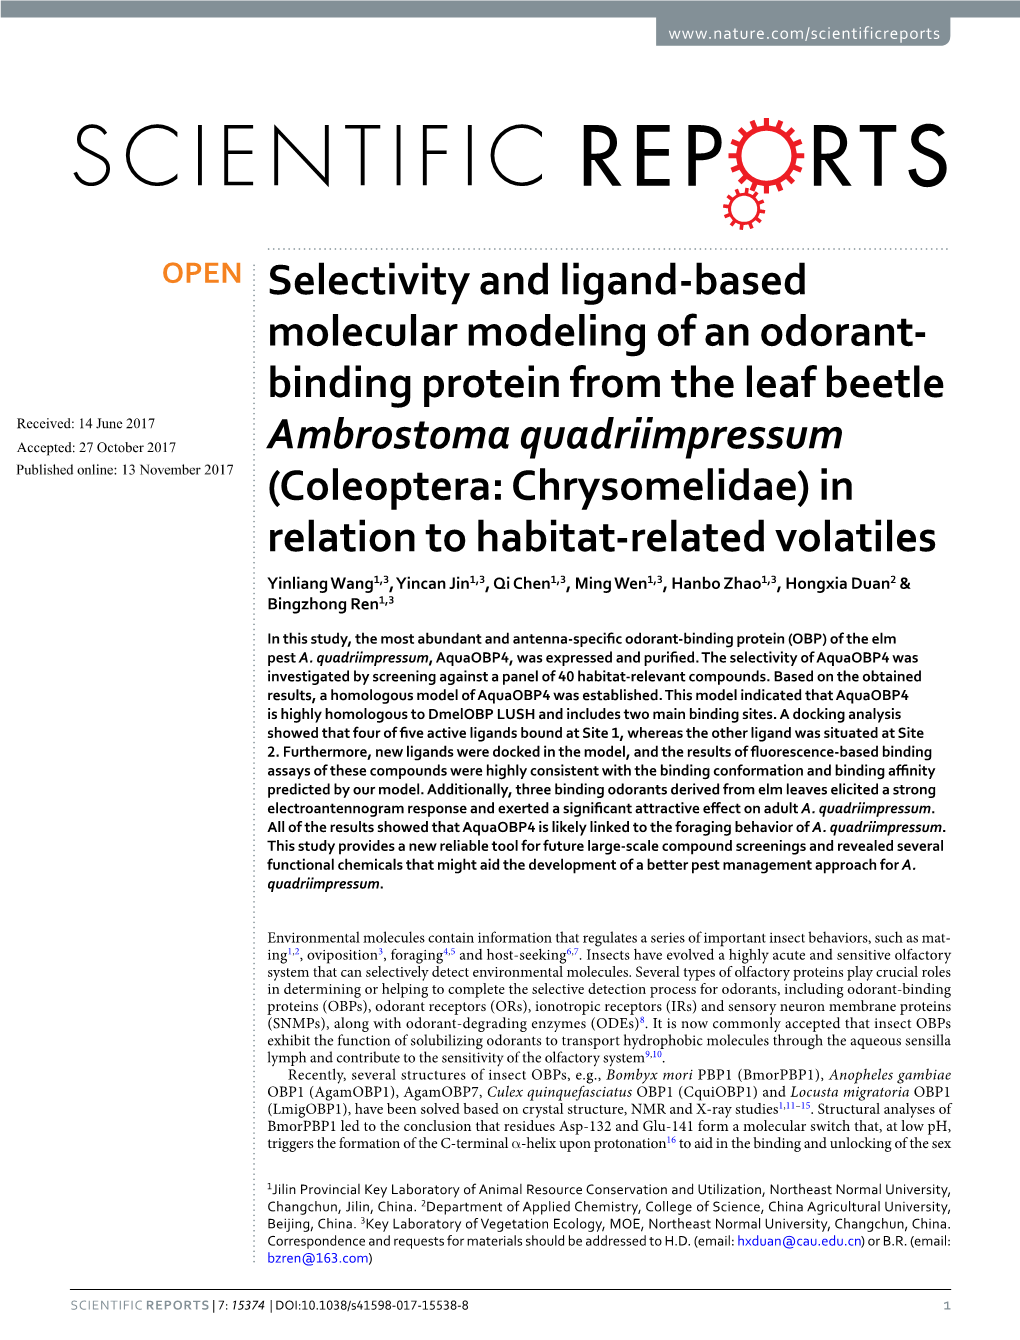 Selectivity and Ligand-Based Molecular Modeling of An